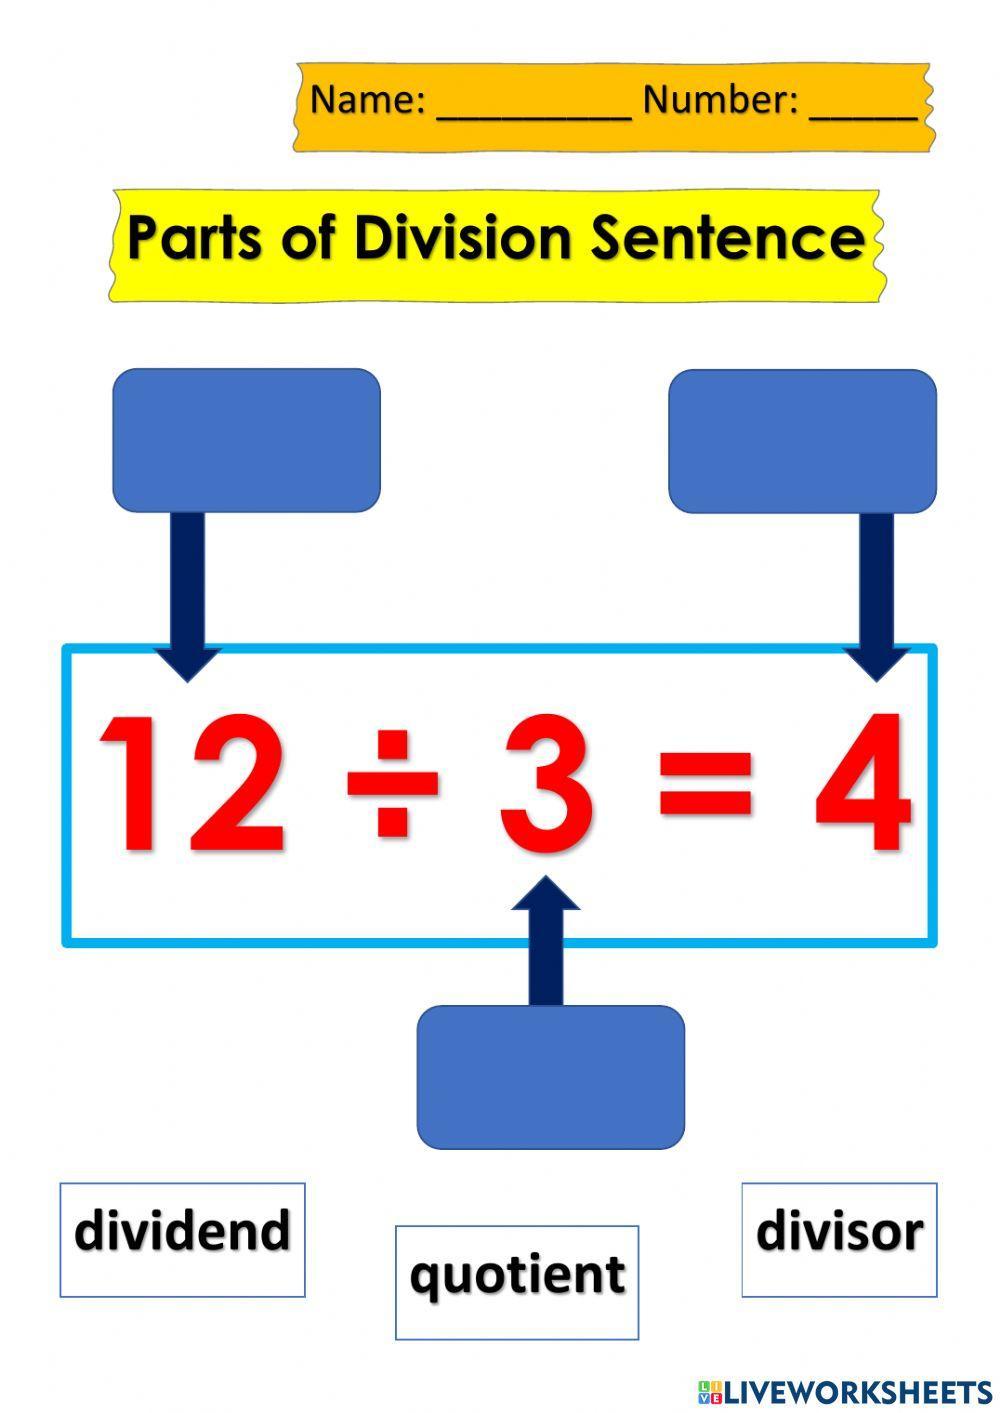 Parts of Division Sentence